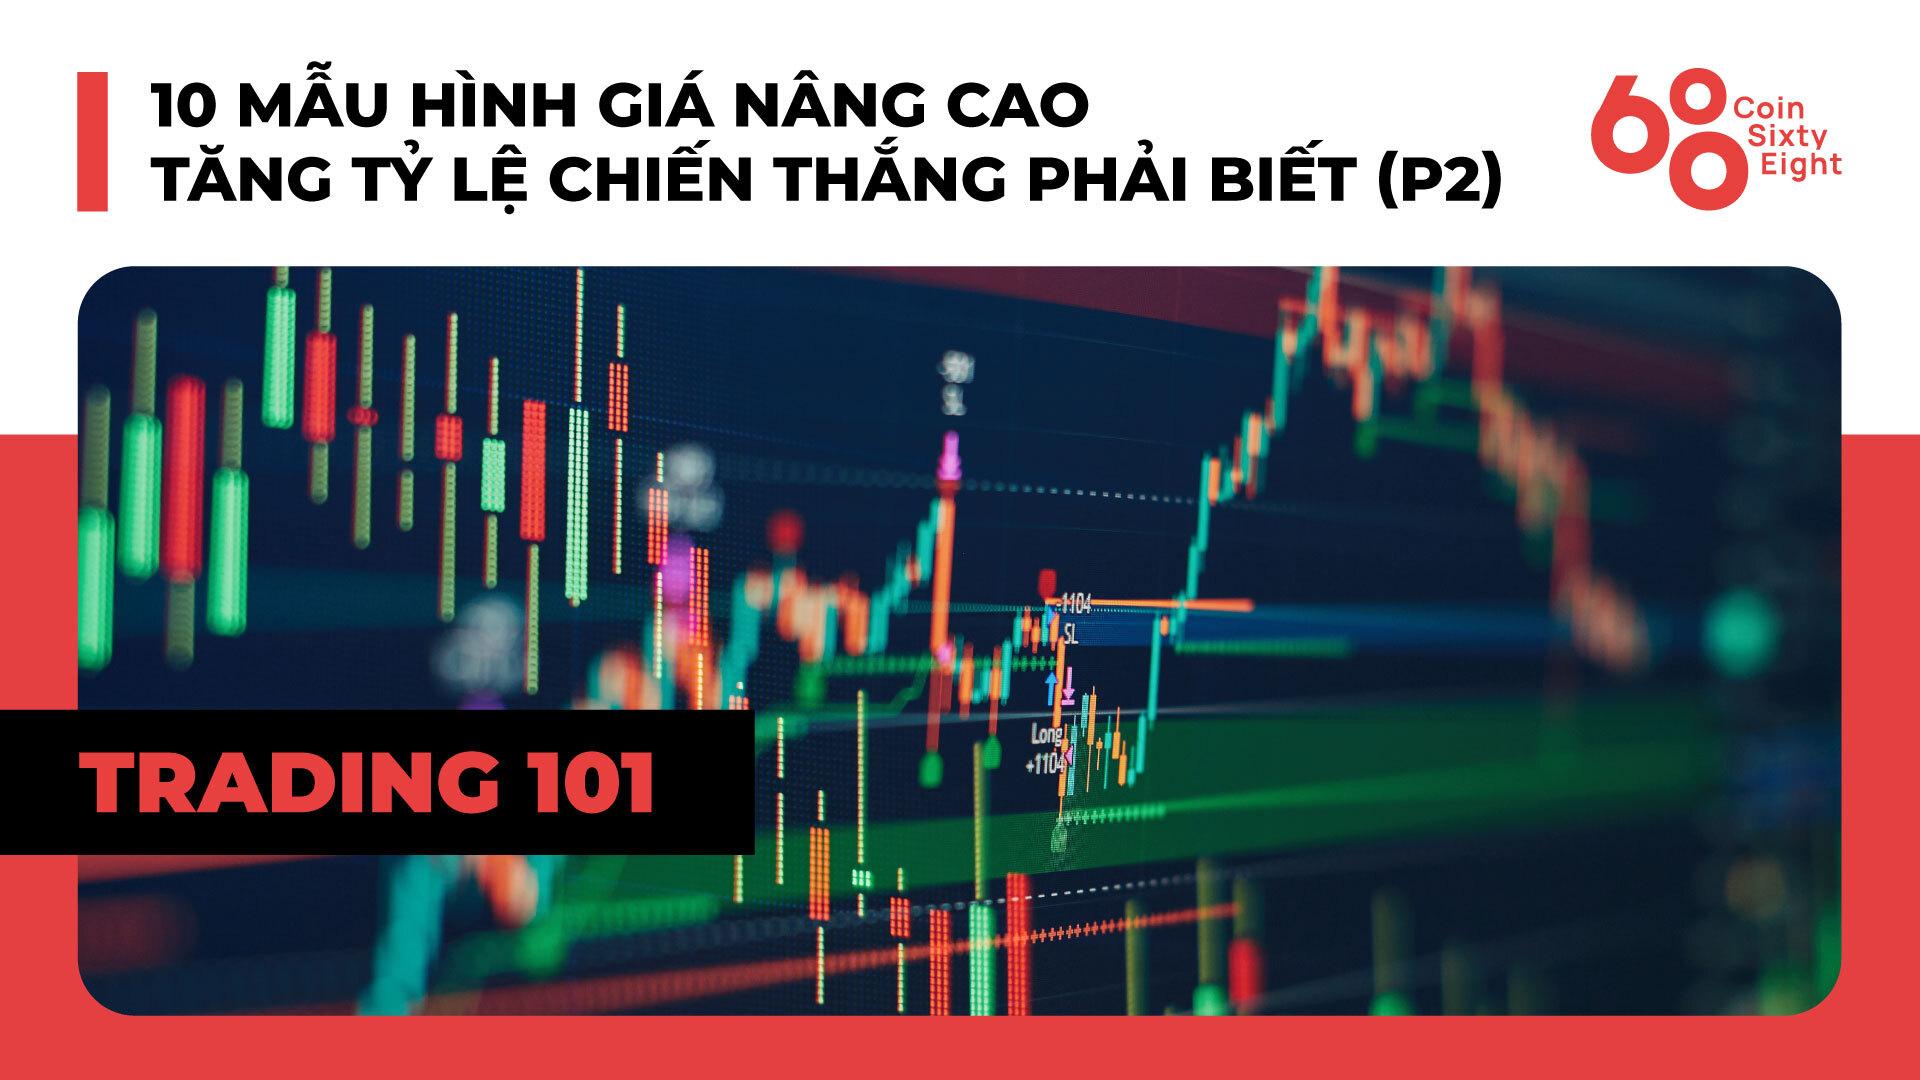 lop-giao-dich-101-price-action-trading-phan-18-10-mau-hinh-gia-nang-cao-tang-ty-le-chien-thang-phai-biet-p2